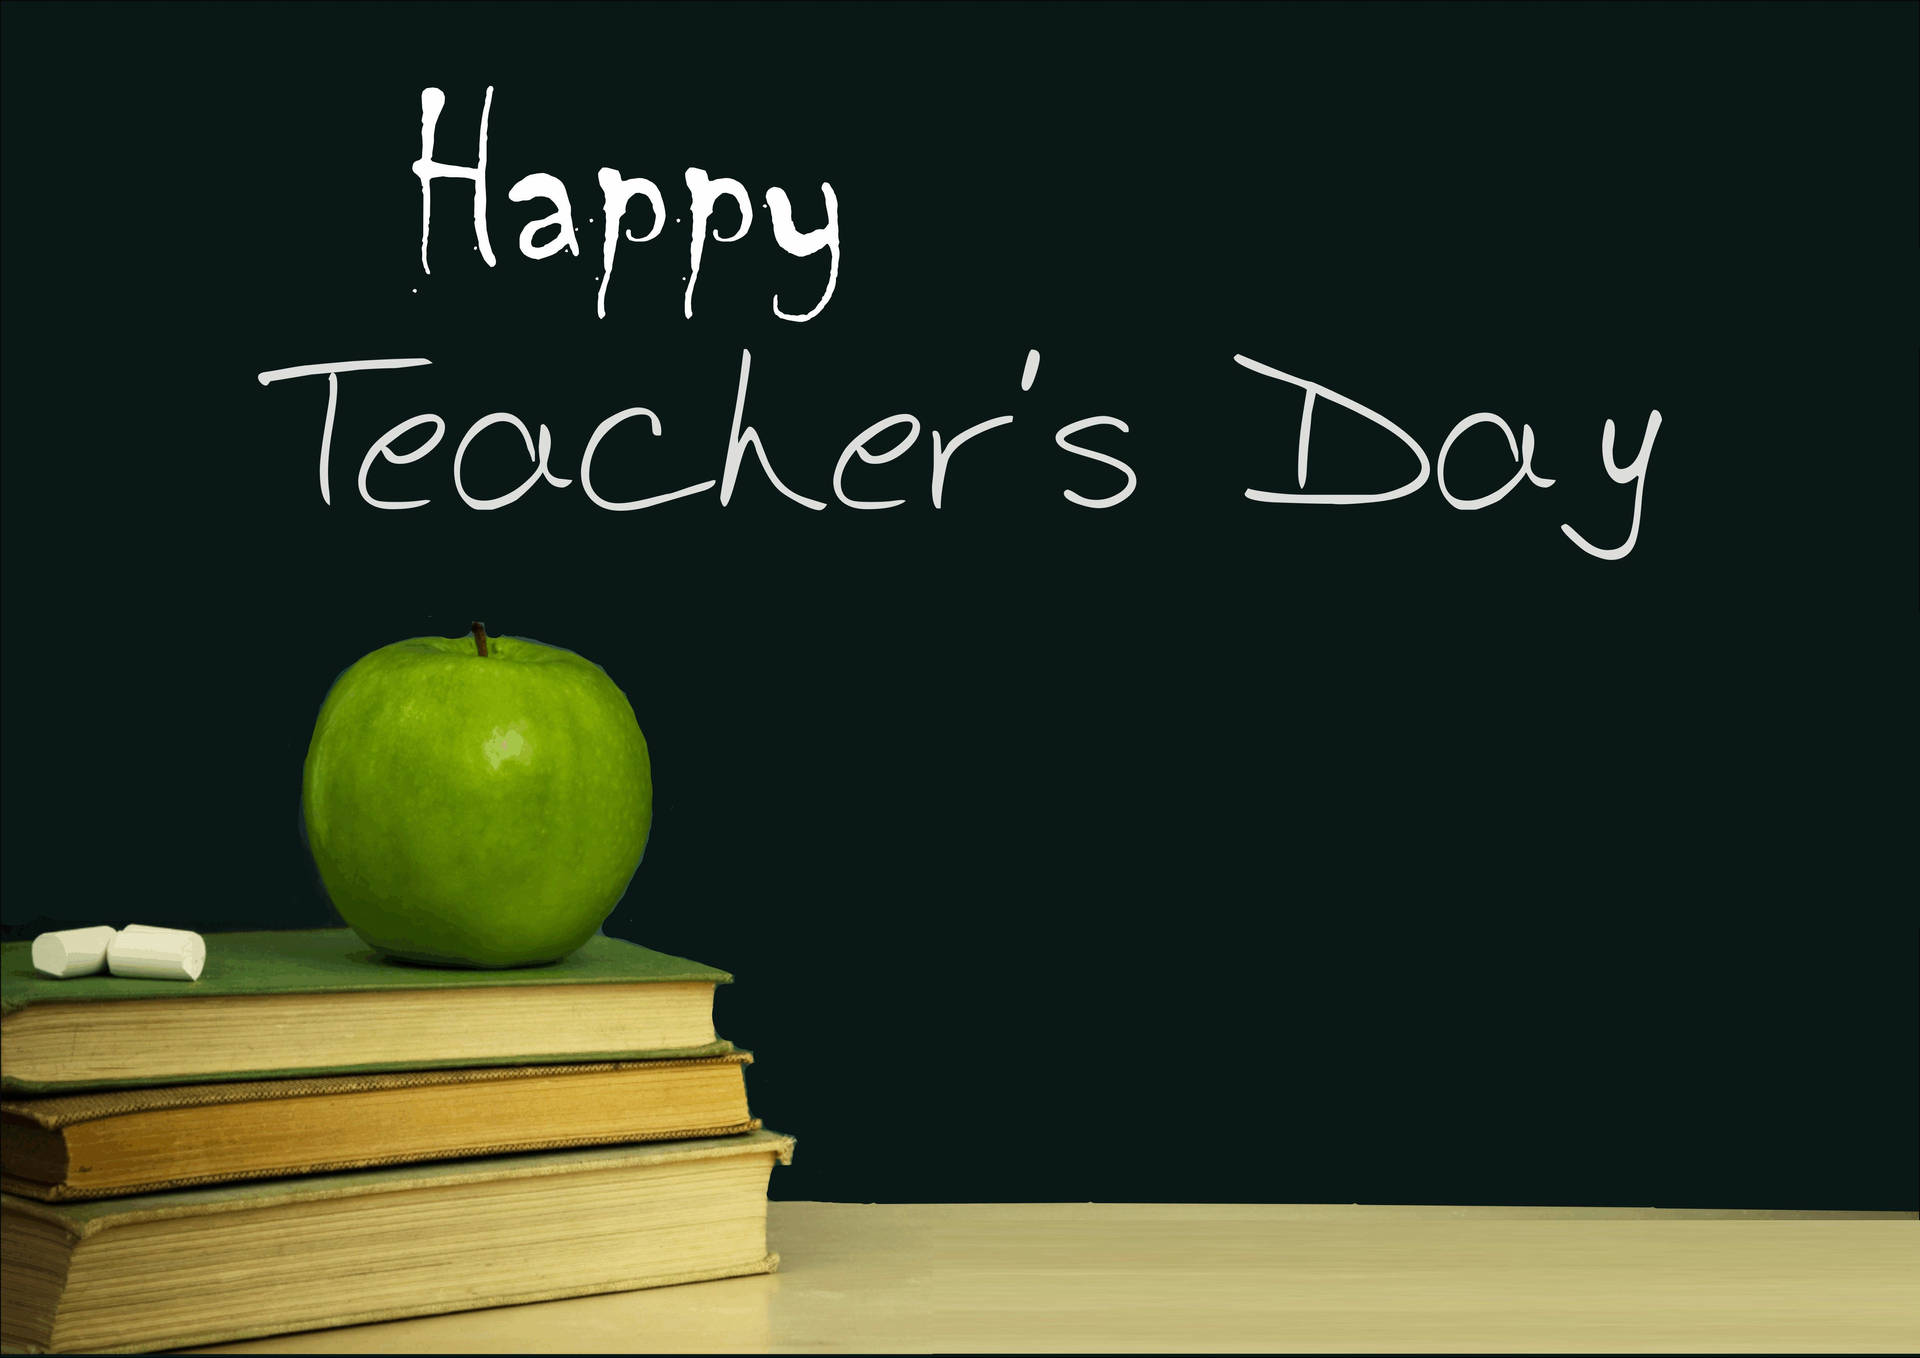 Happy Teachers' Day Books And Apple